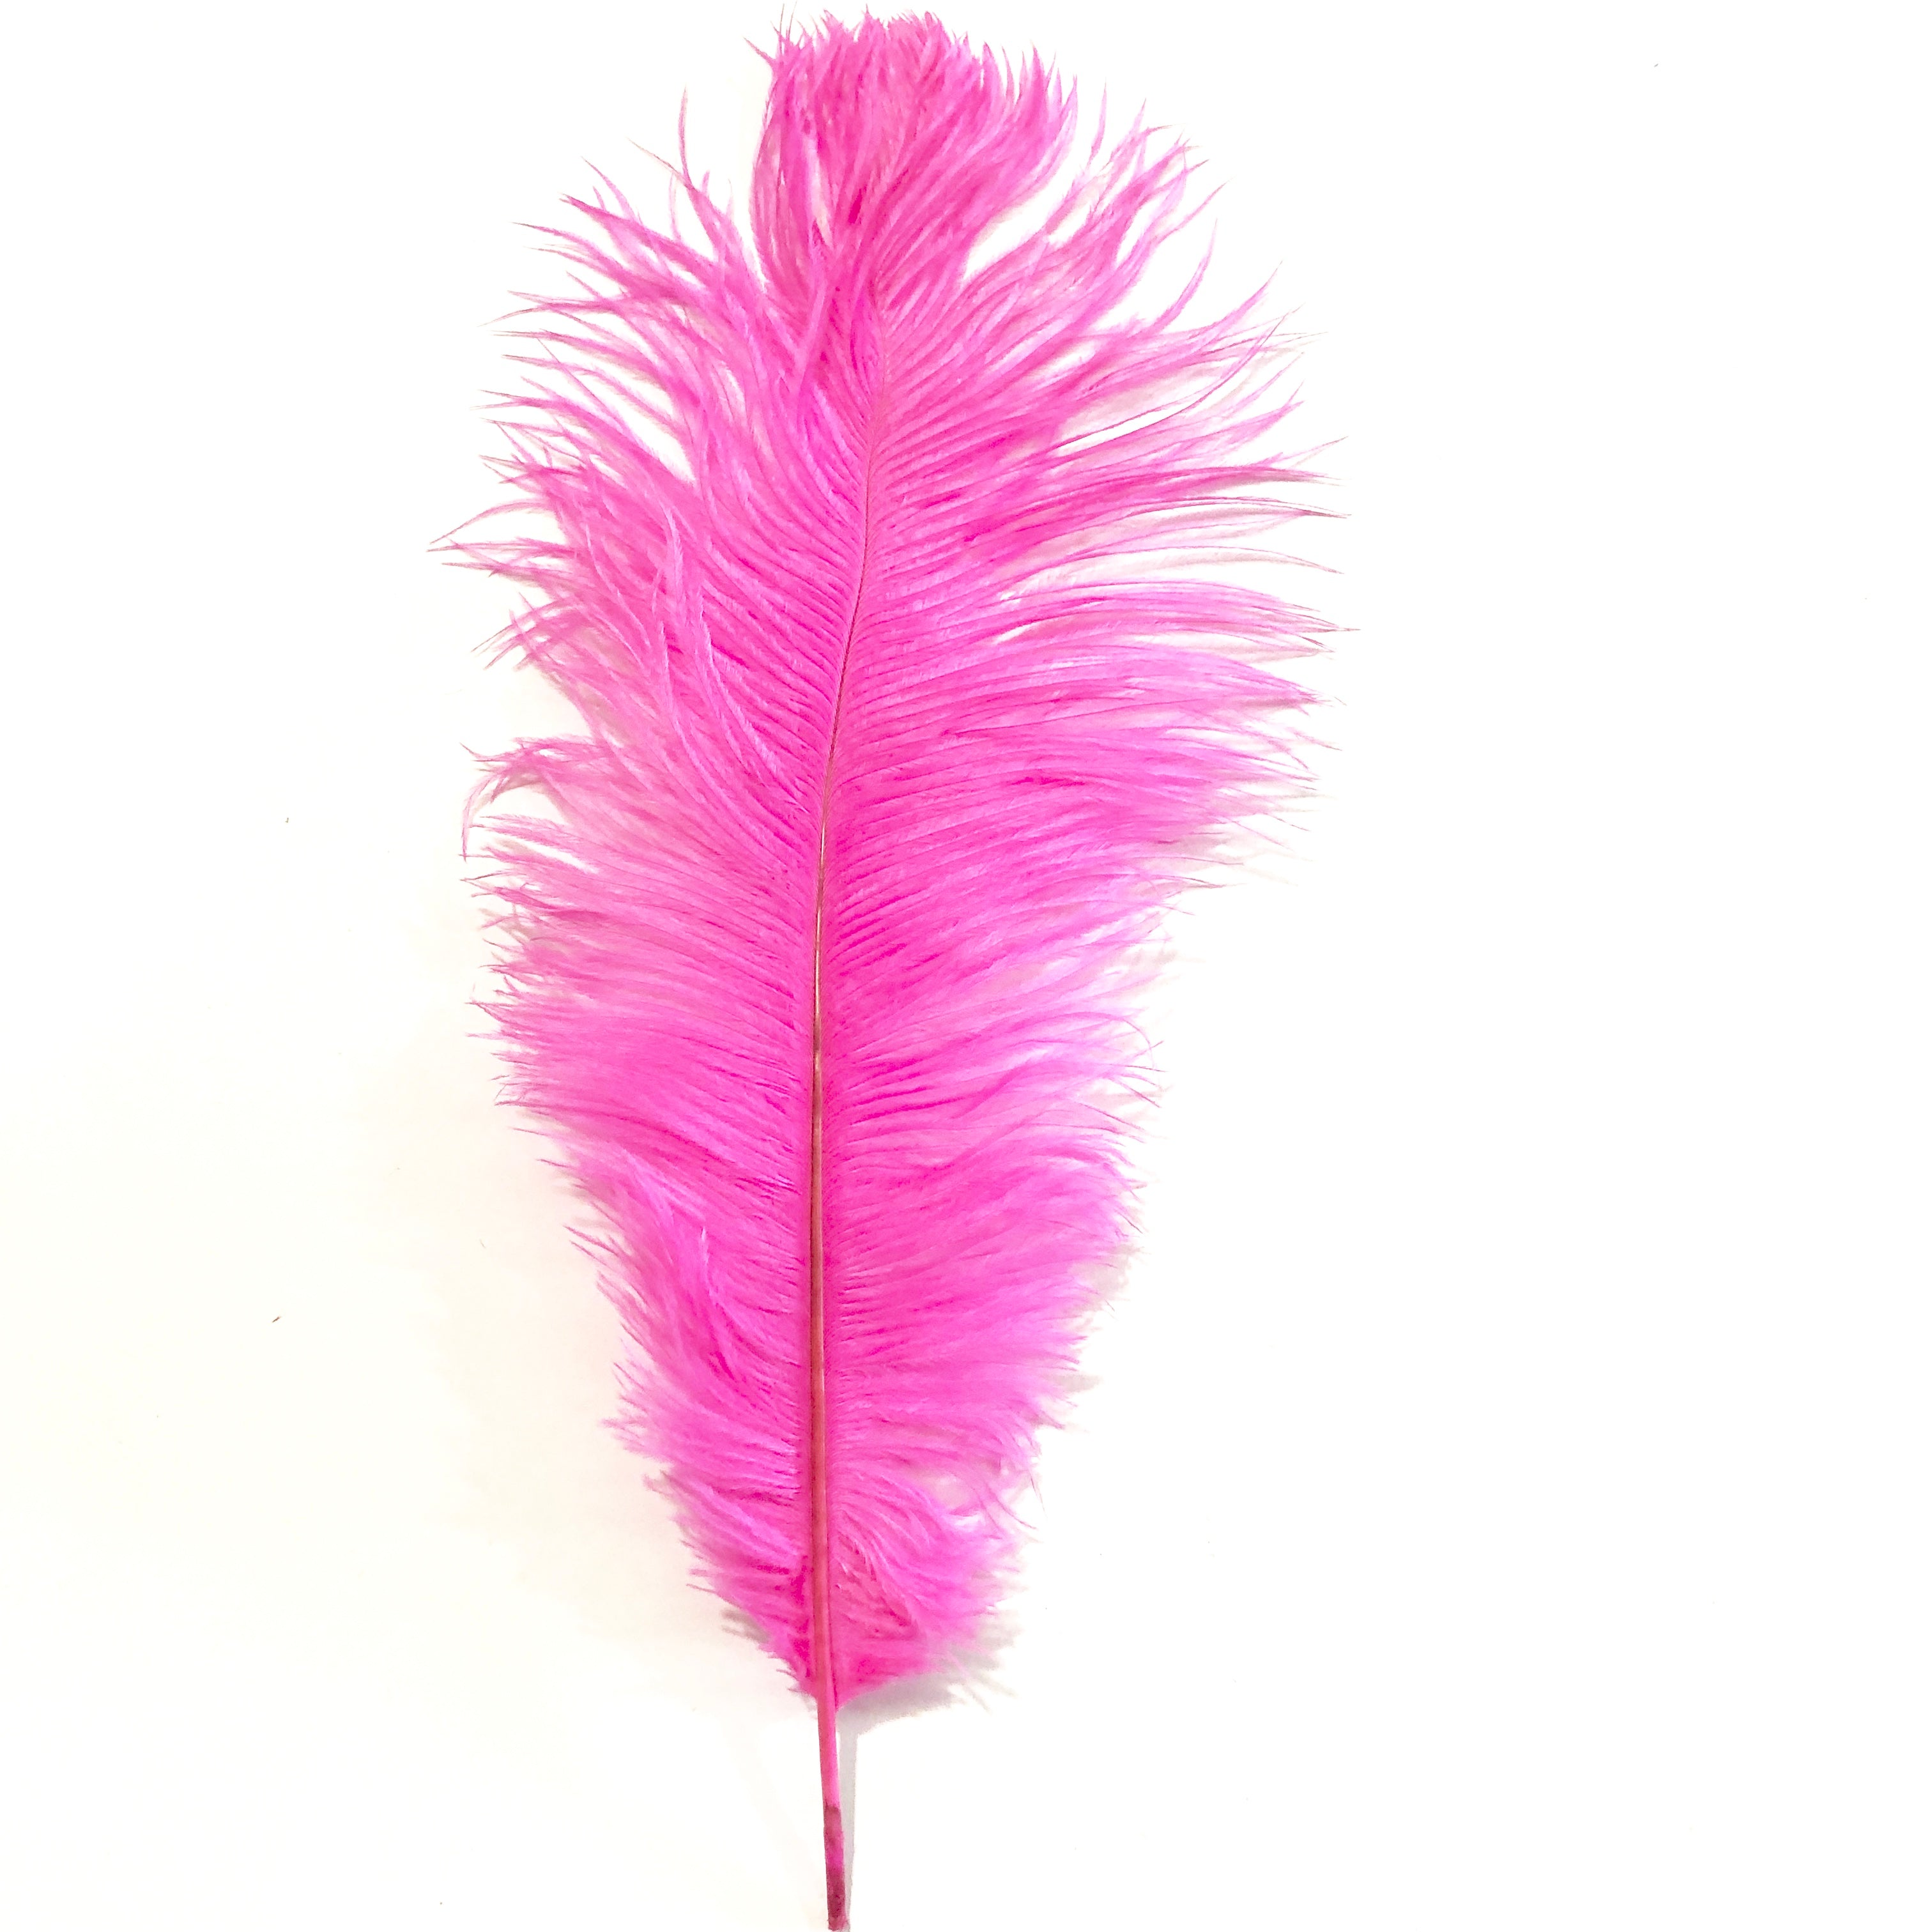 New Hot Pink Drab 37-42cm - Wholesale Feathers & Craft Supplies | eBay